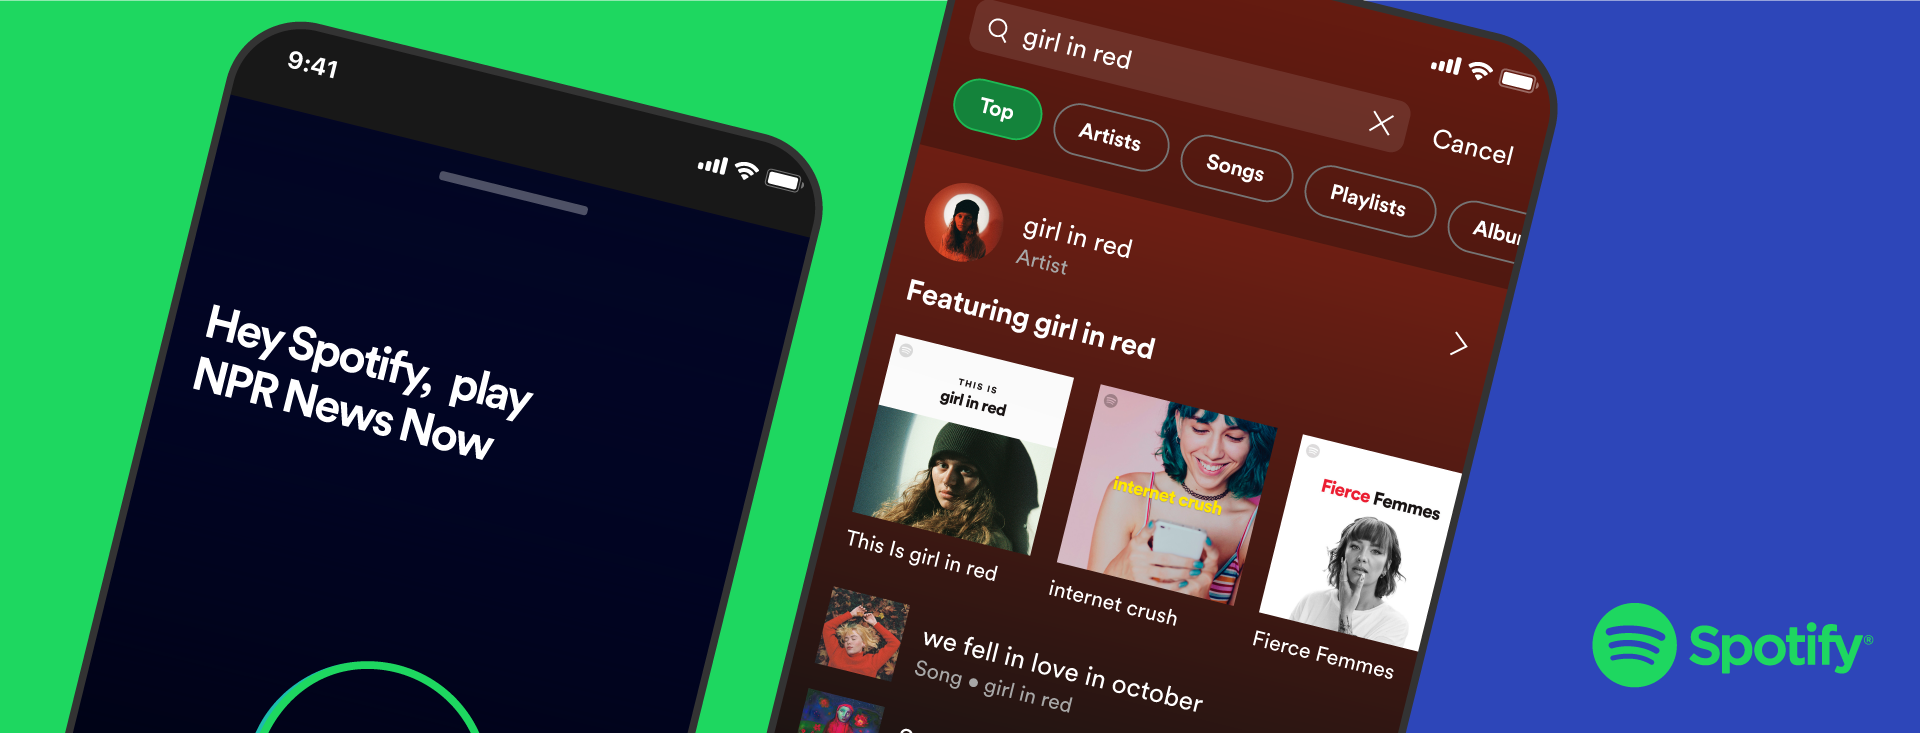 Hey Spotify' feature rolling out to some users